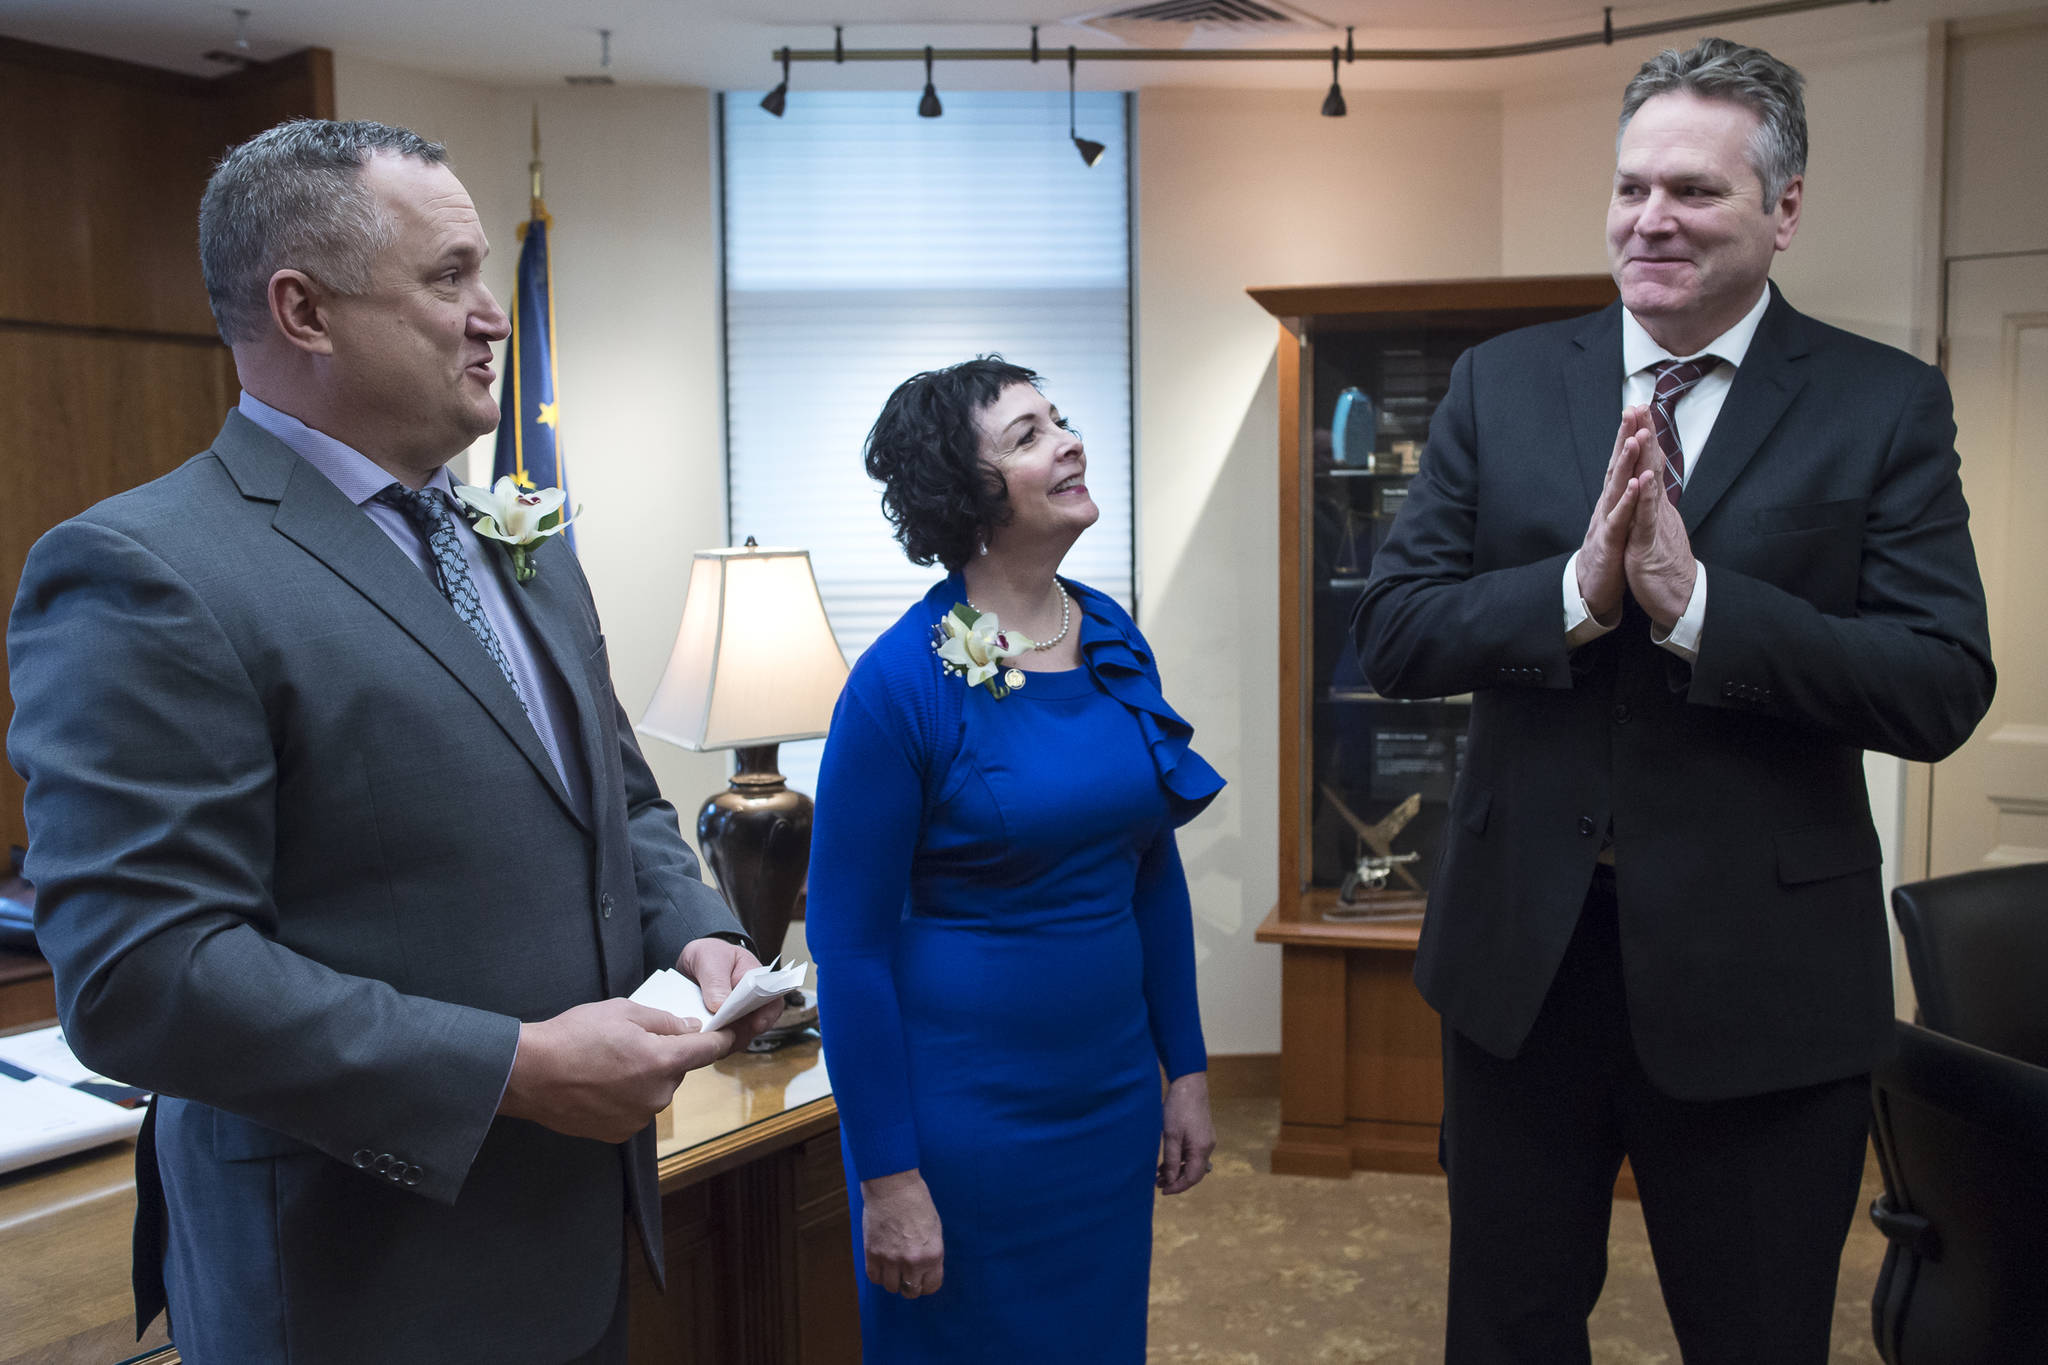 Sen. Mike Shower, R-Wasilla, left, and Sen. Shelley Hughes, R-Palmer, relay a message to Gov. Michael J. Dunleavy in his Capitol office that the Senate is open and ready for business on the first day of the 31st Session of the Alaska Legislature on Tuesday, Jan. 15, 2019. (Michael Penn | Juneau Empire)